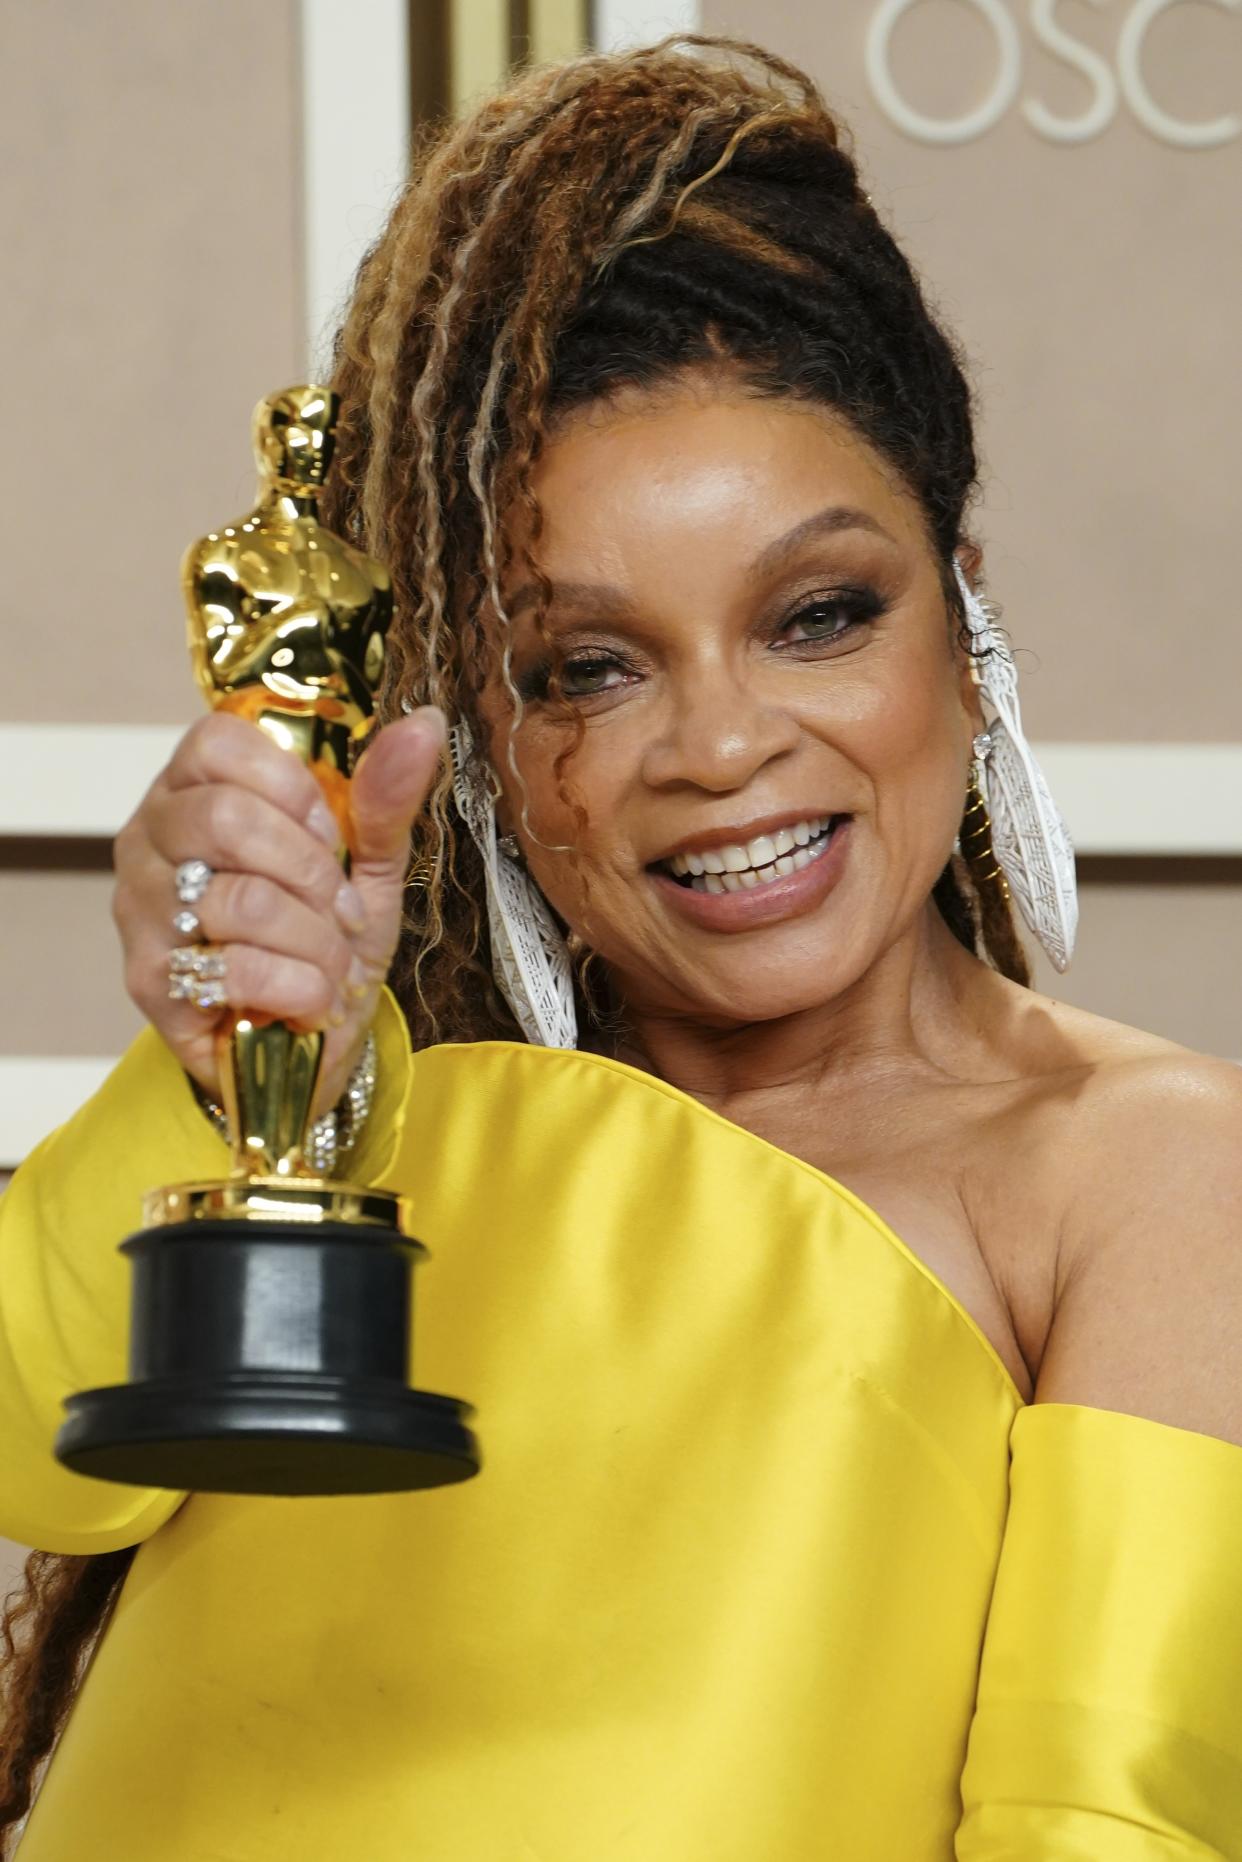 Ruth E. Carter poses with the award for best costume design for "Black Panther: Wakanda Forever" in the press room at the Oscars on Sunday, March 12, 2023, at the Dolby Theatre in Los Angeles. (Photo by Jordan Strauss/Invision/AP)